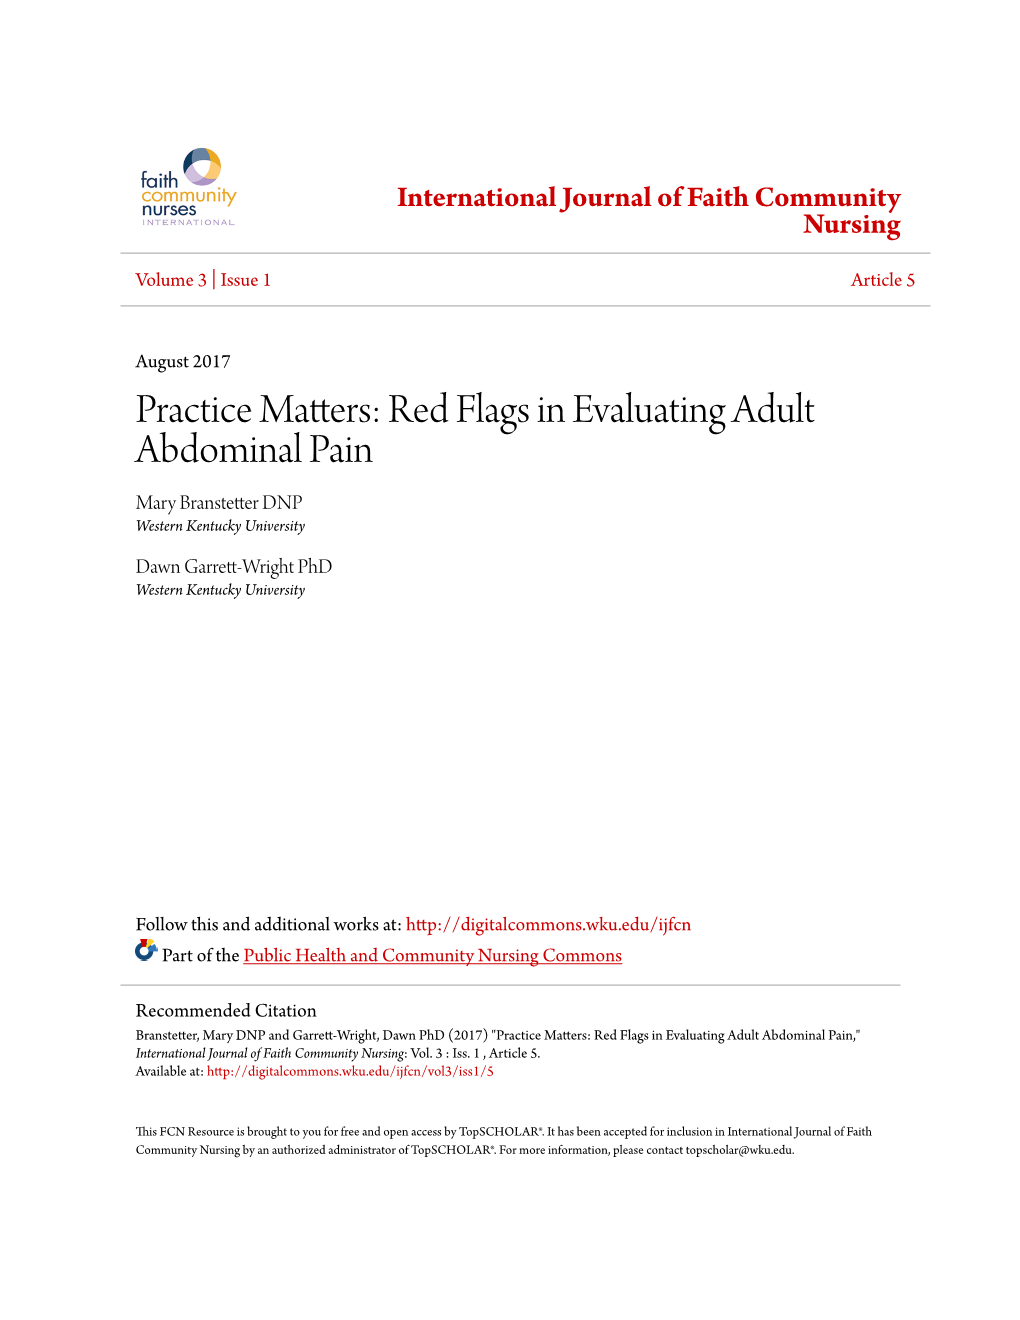 Red Flags in Evaluating Adult Abdominal Pain Mary Branstetter DNP Western Kentucky University